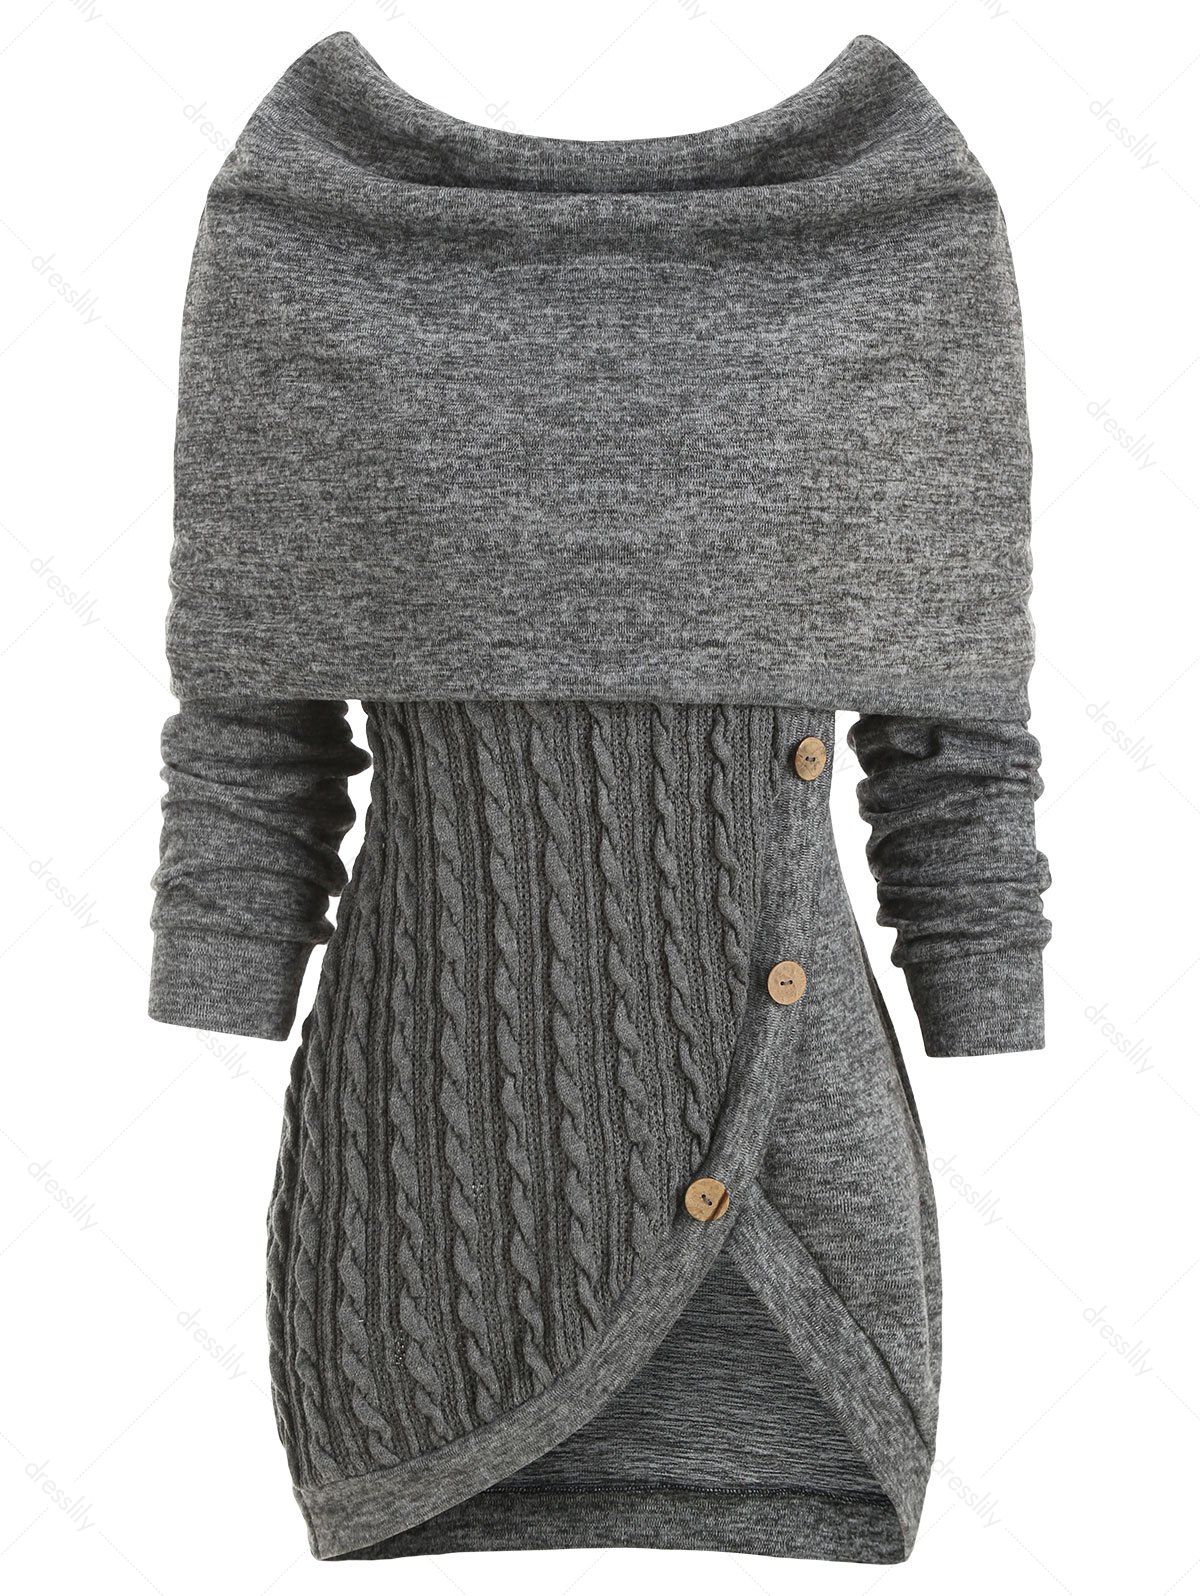 Cowl Neck Mock Button Cable Knit Knitwear - GRAY M